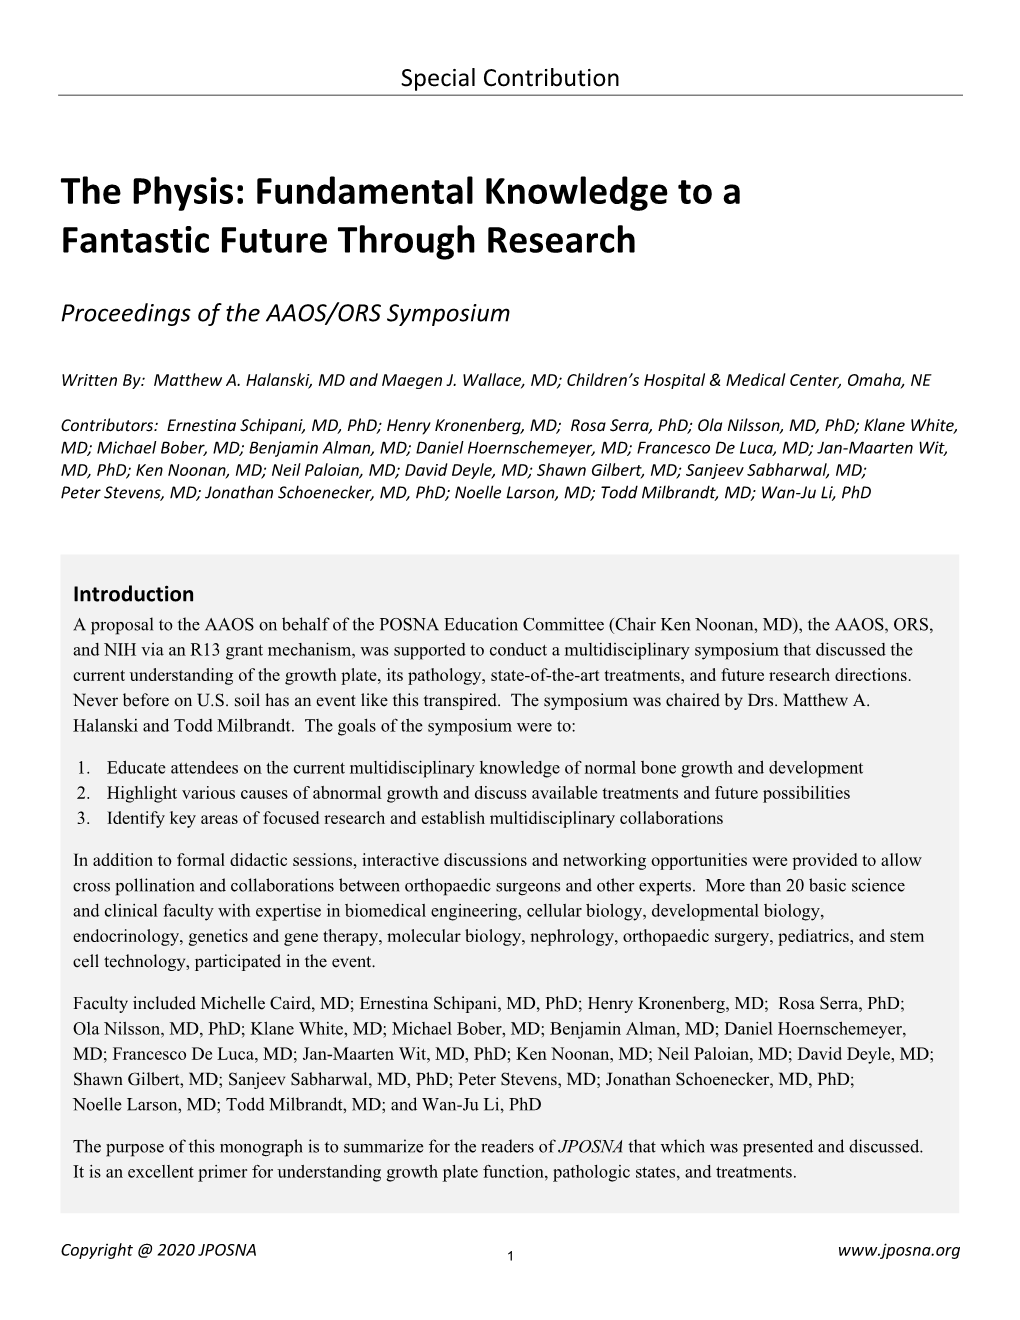 The Physis: Fundamental Knowledge to a Fantastic Future Through Research